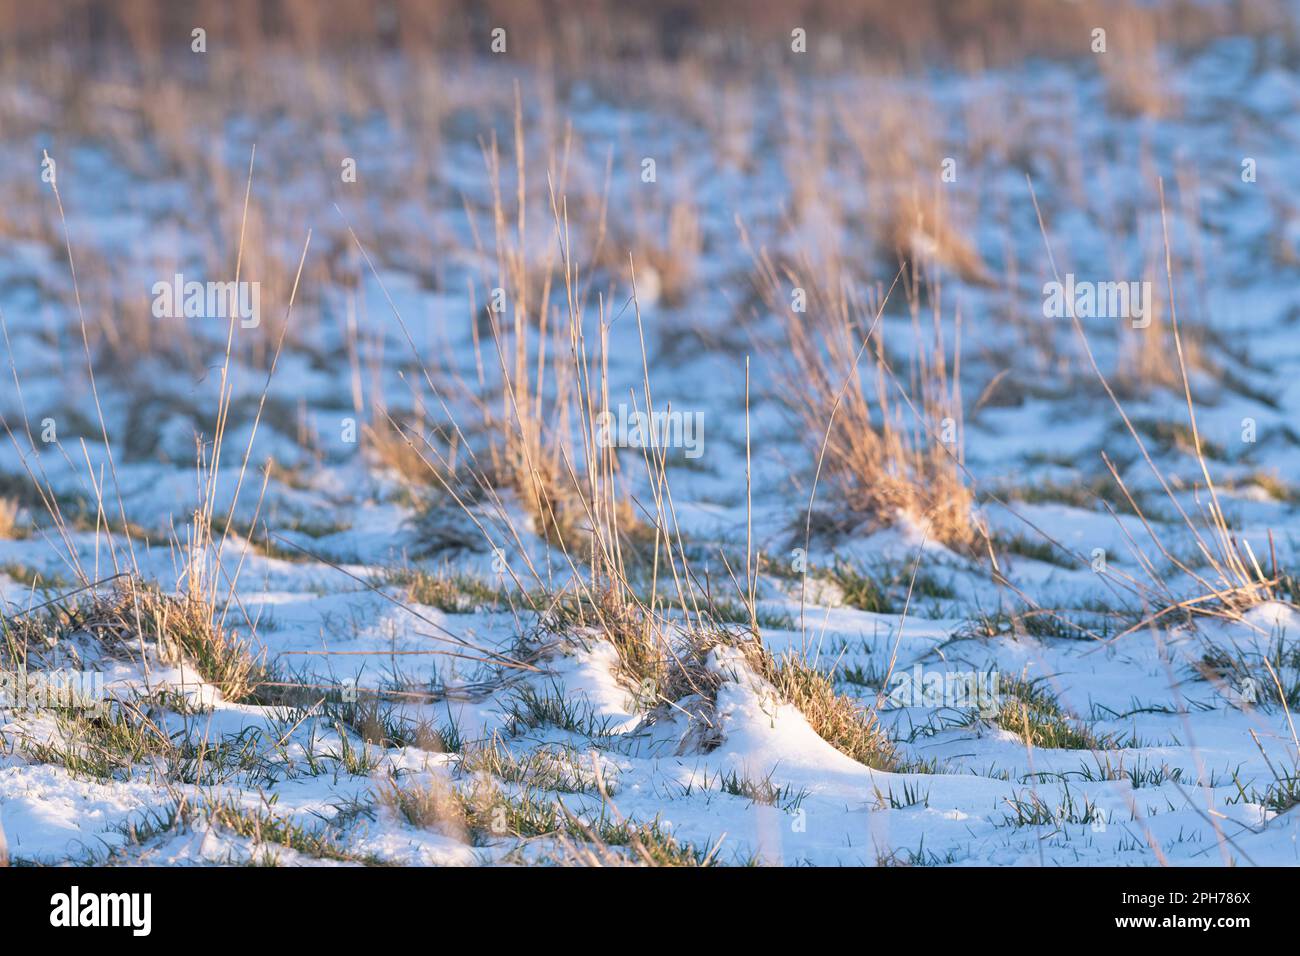 Late Afternoon Sunlight on Tussocks of Grass Growing on a Snow-covered Heath Stock Photo